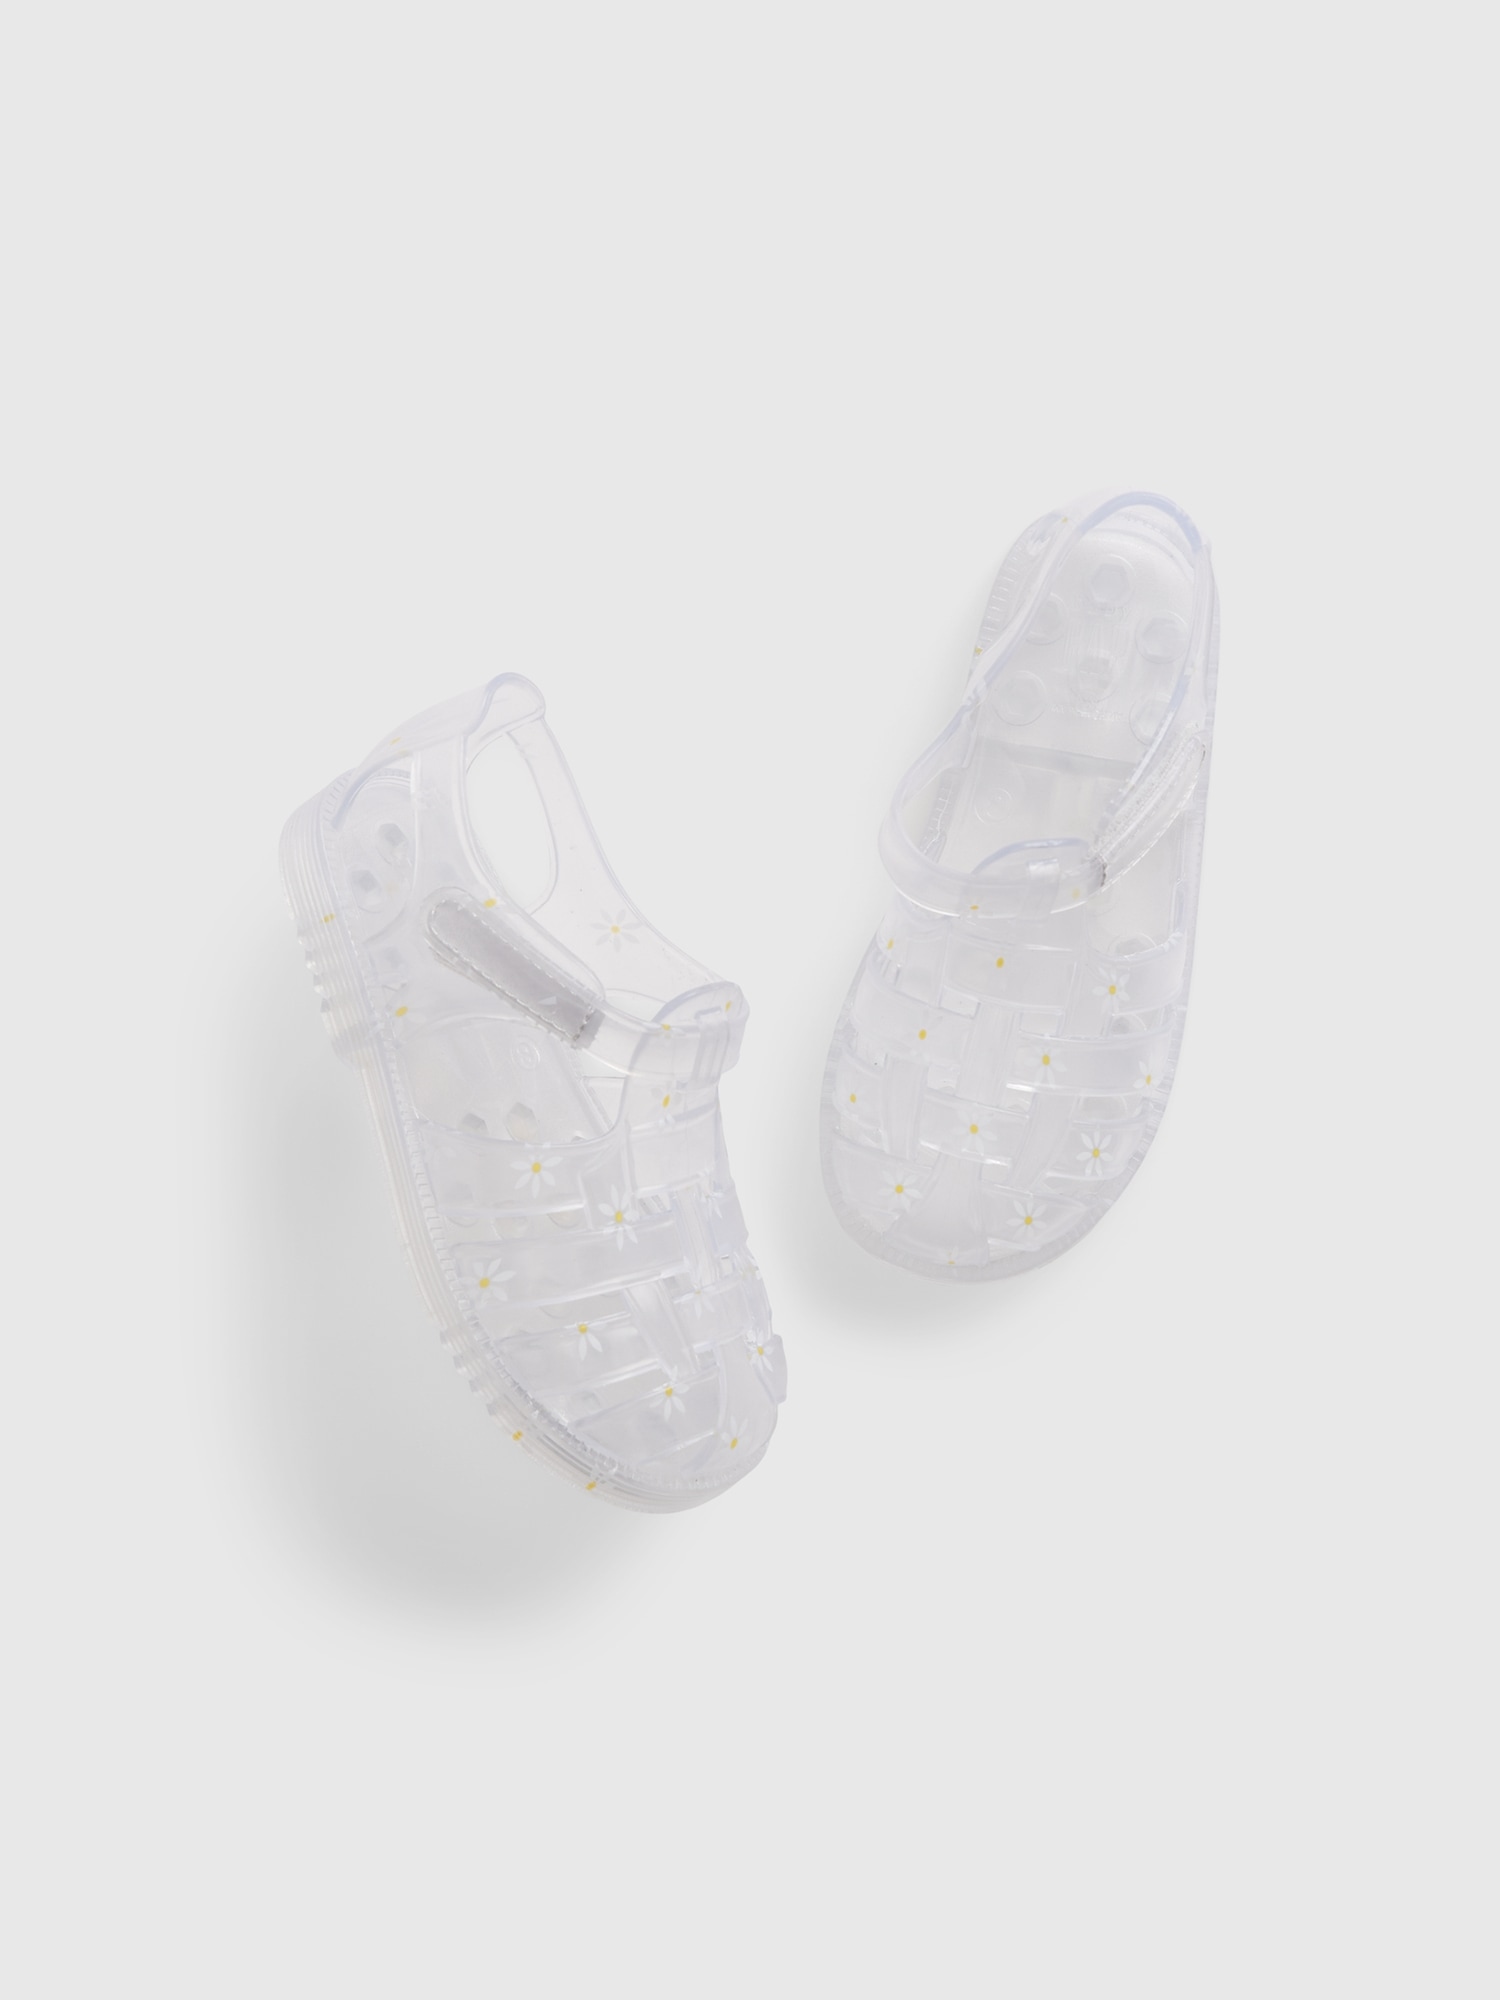 Gap Babies' Toddler Jelly Sandals In Silver